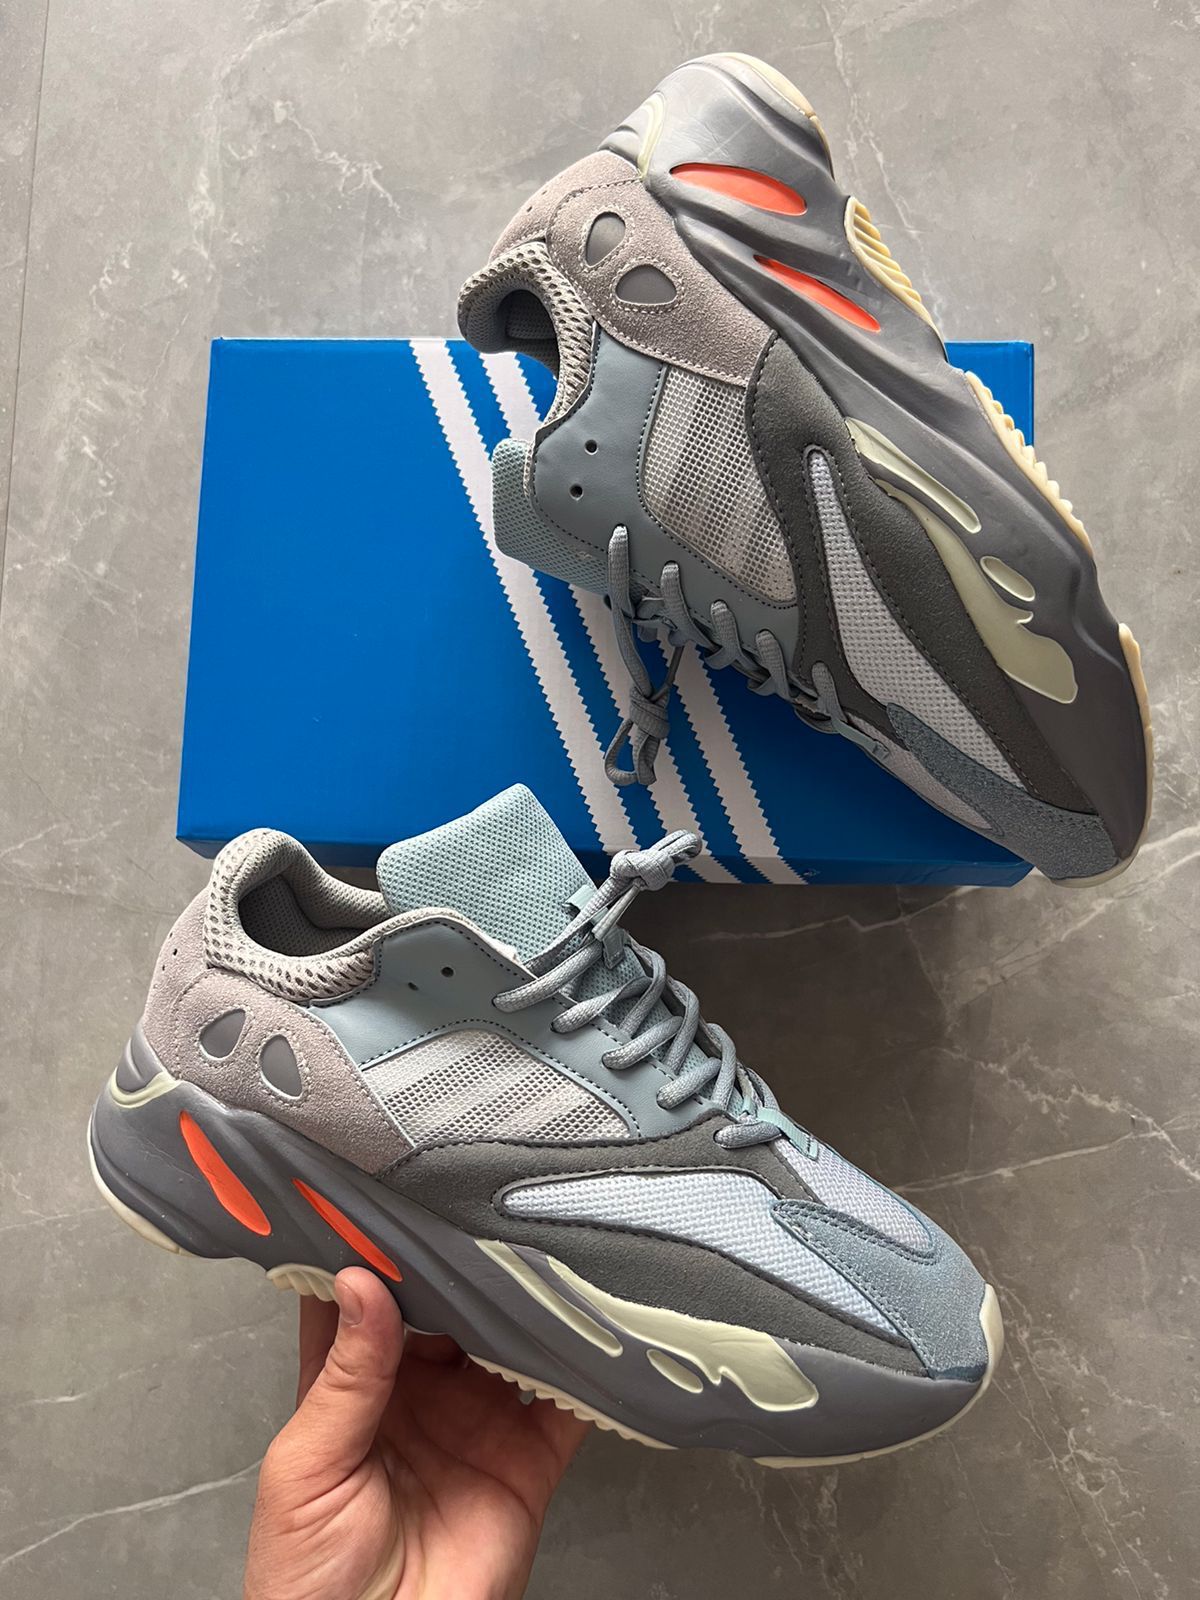 Yeezy 700 Wave Runner Grey Sports Shoes